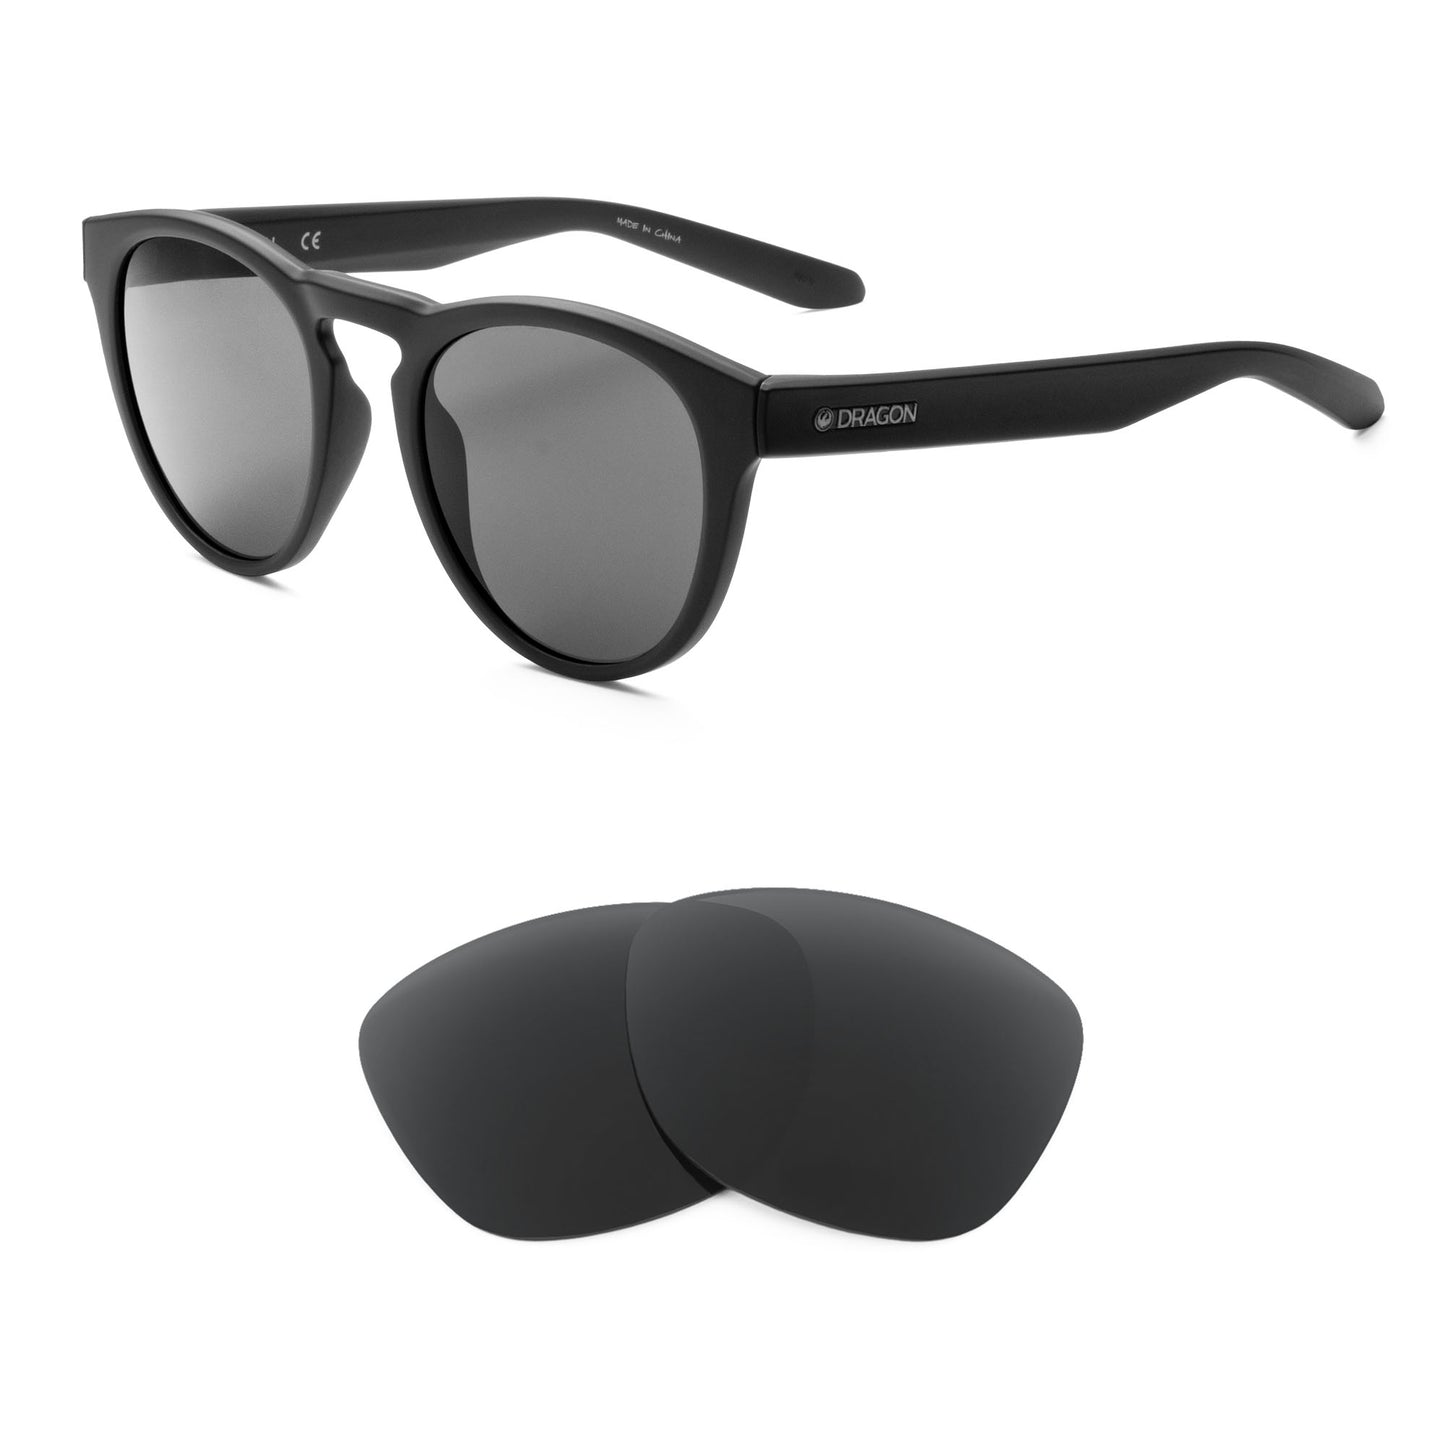 Dragon Opus sunglasses with replacement lenses